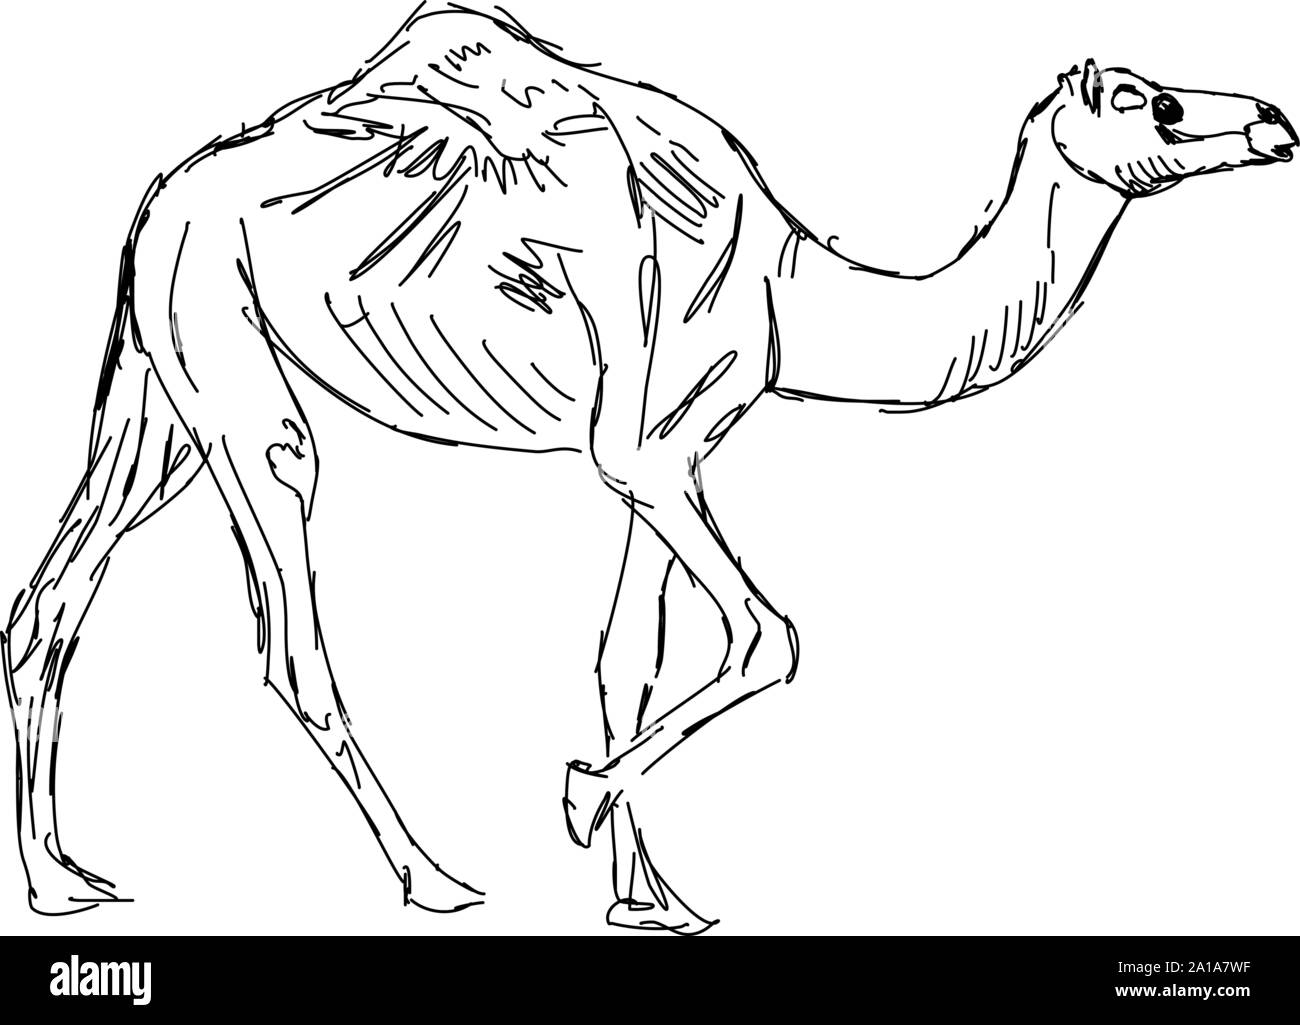 Camel drawing, illustration, vector on white background Stock ...